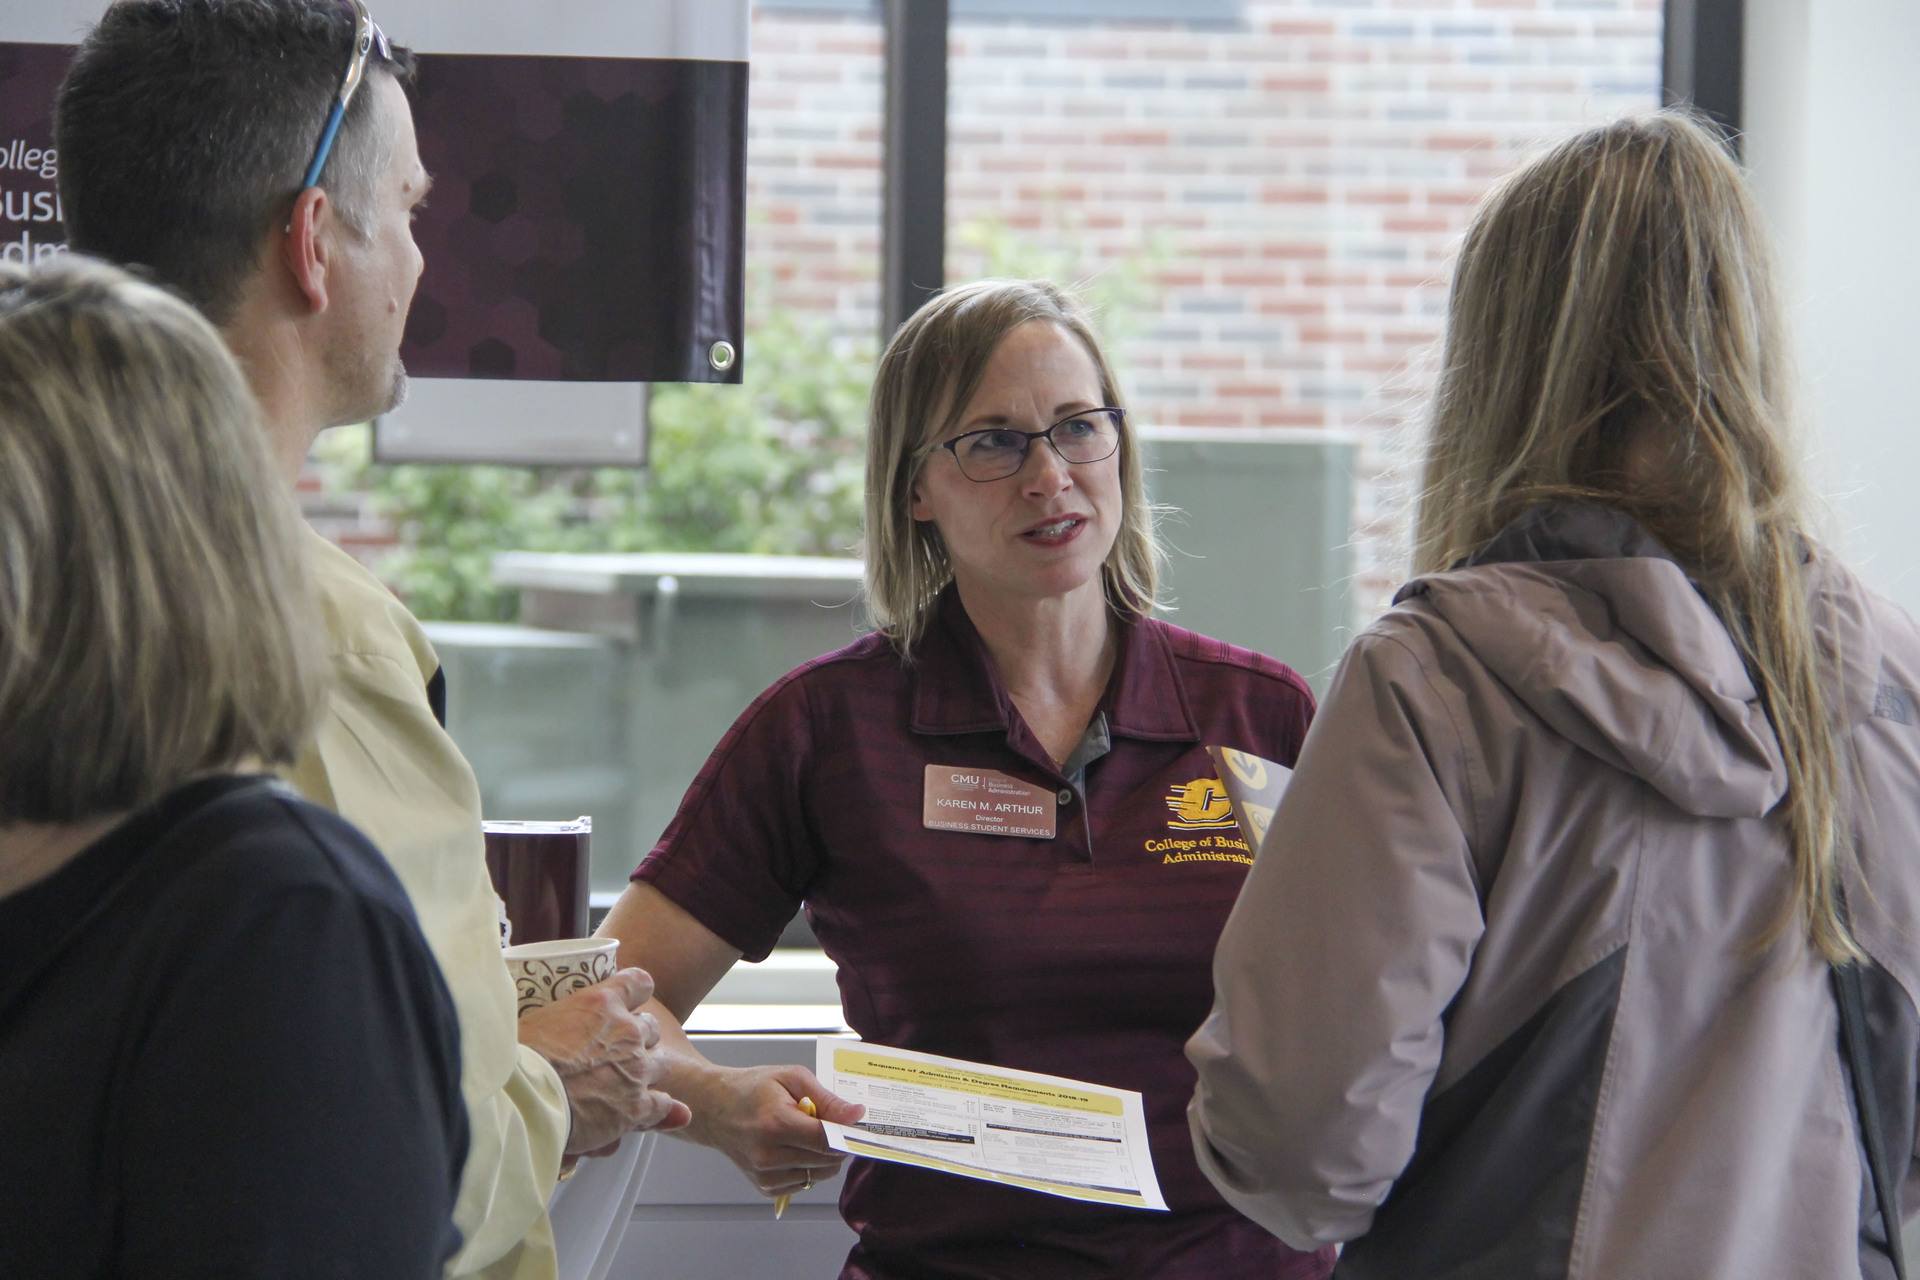 Advisors advising potential CMU student and their parent